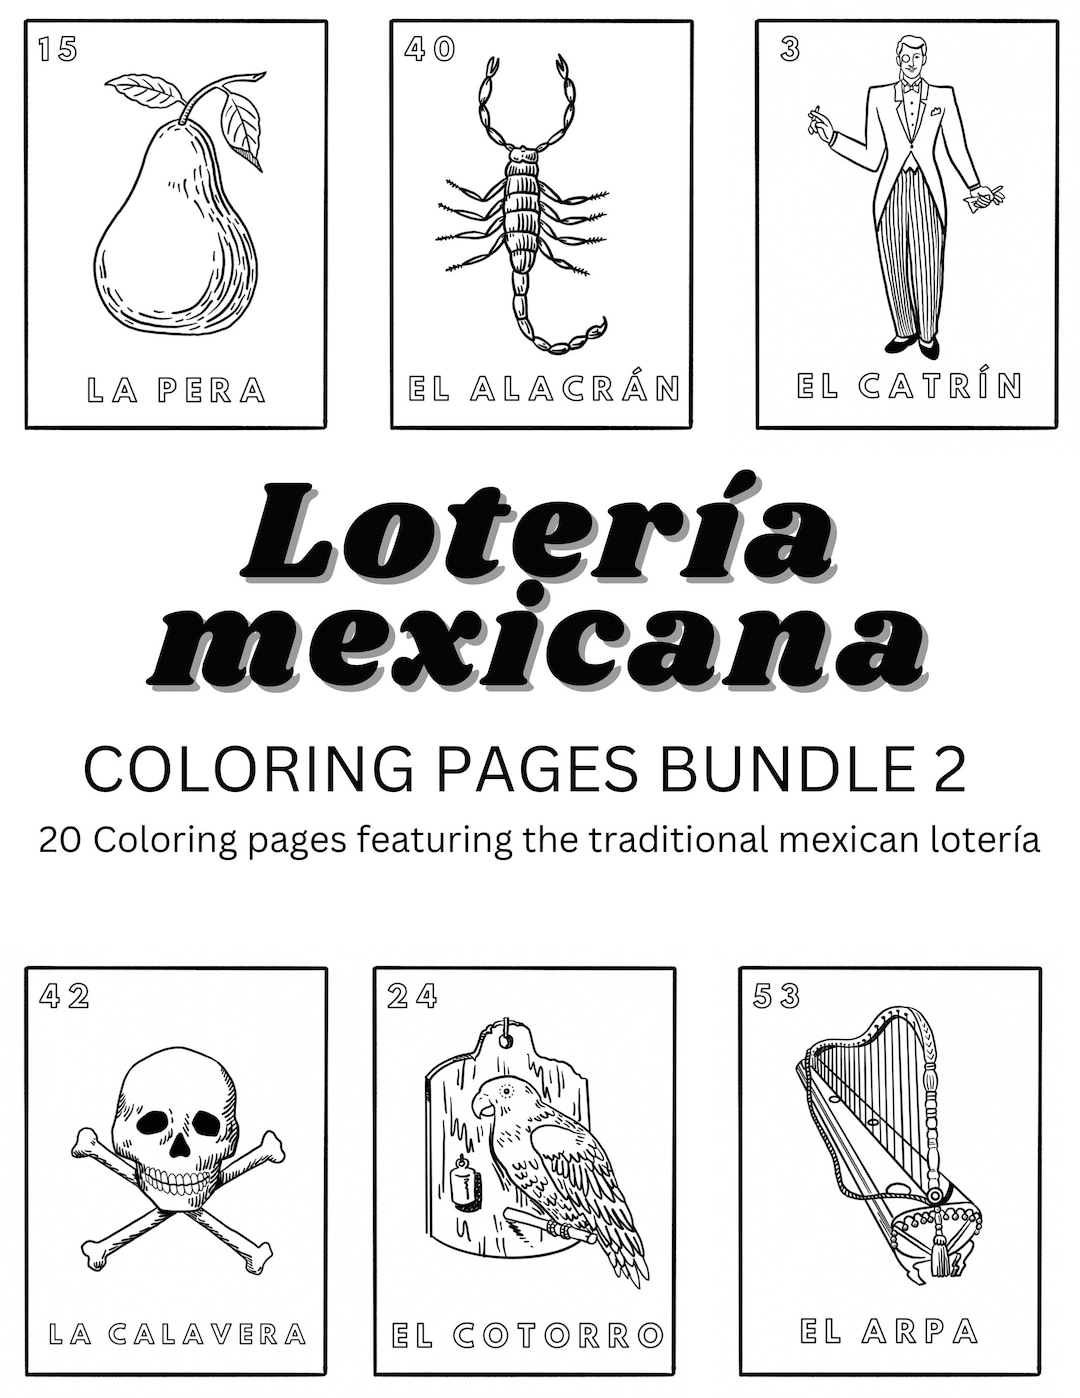 mexican-loter-a-coloring-pages-etsy-uk